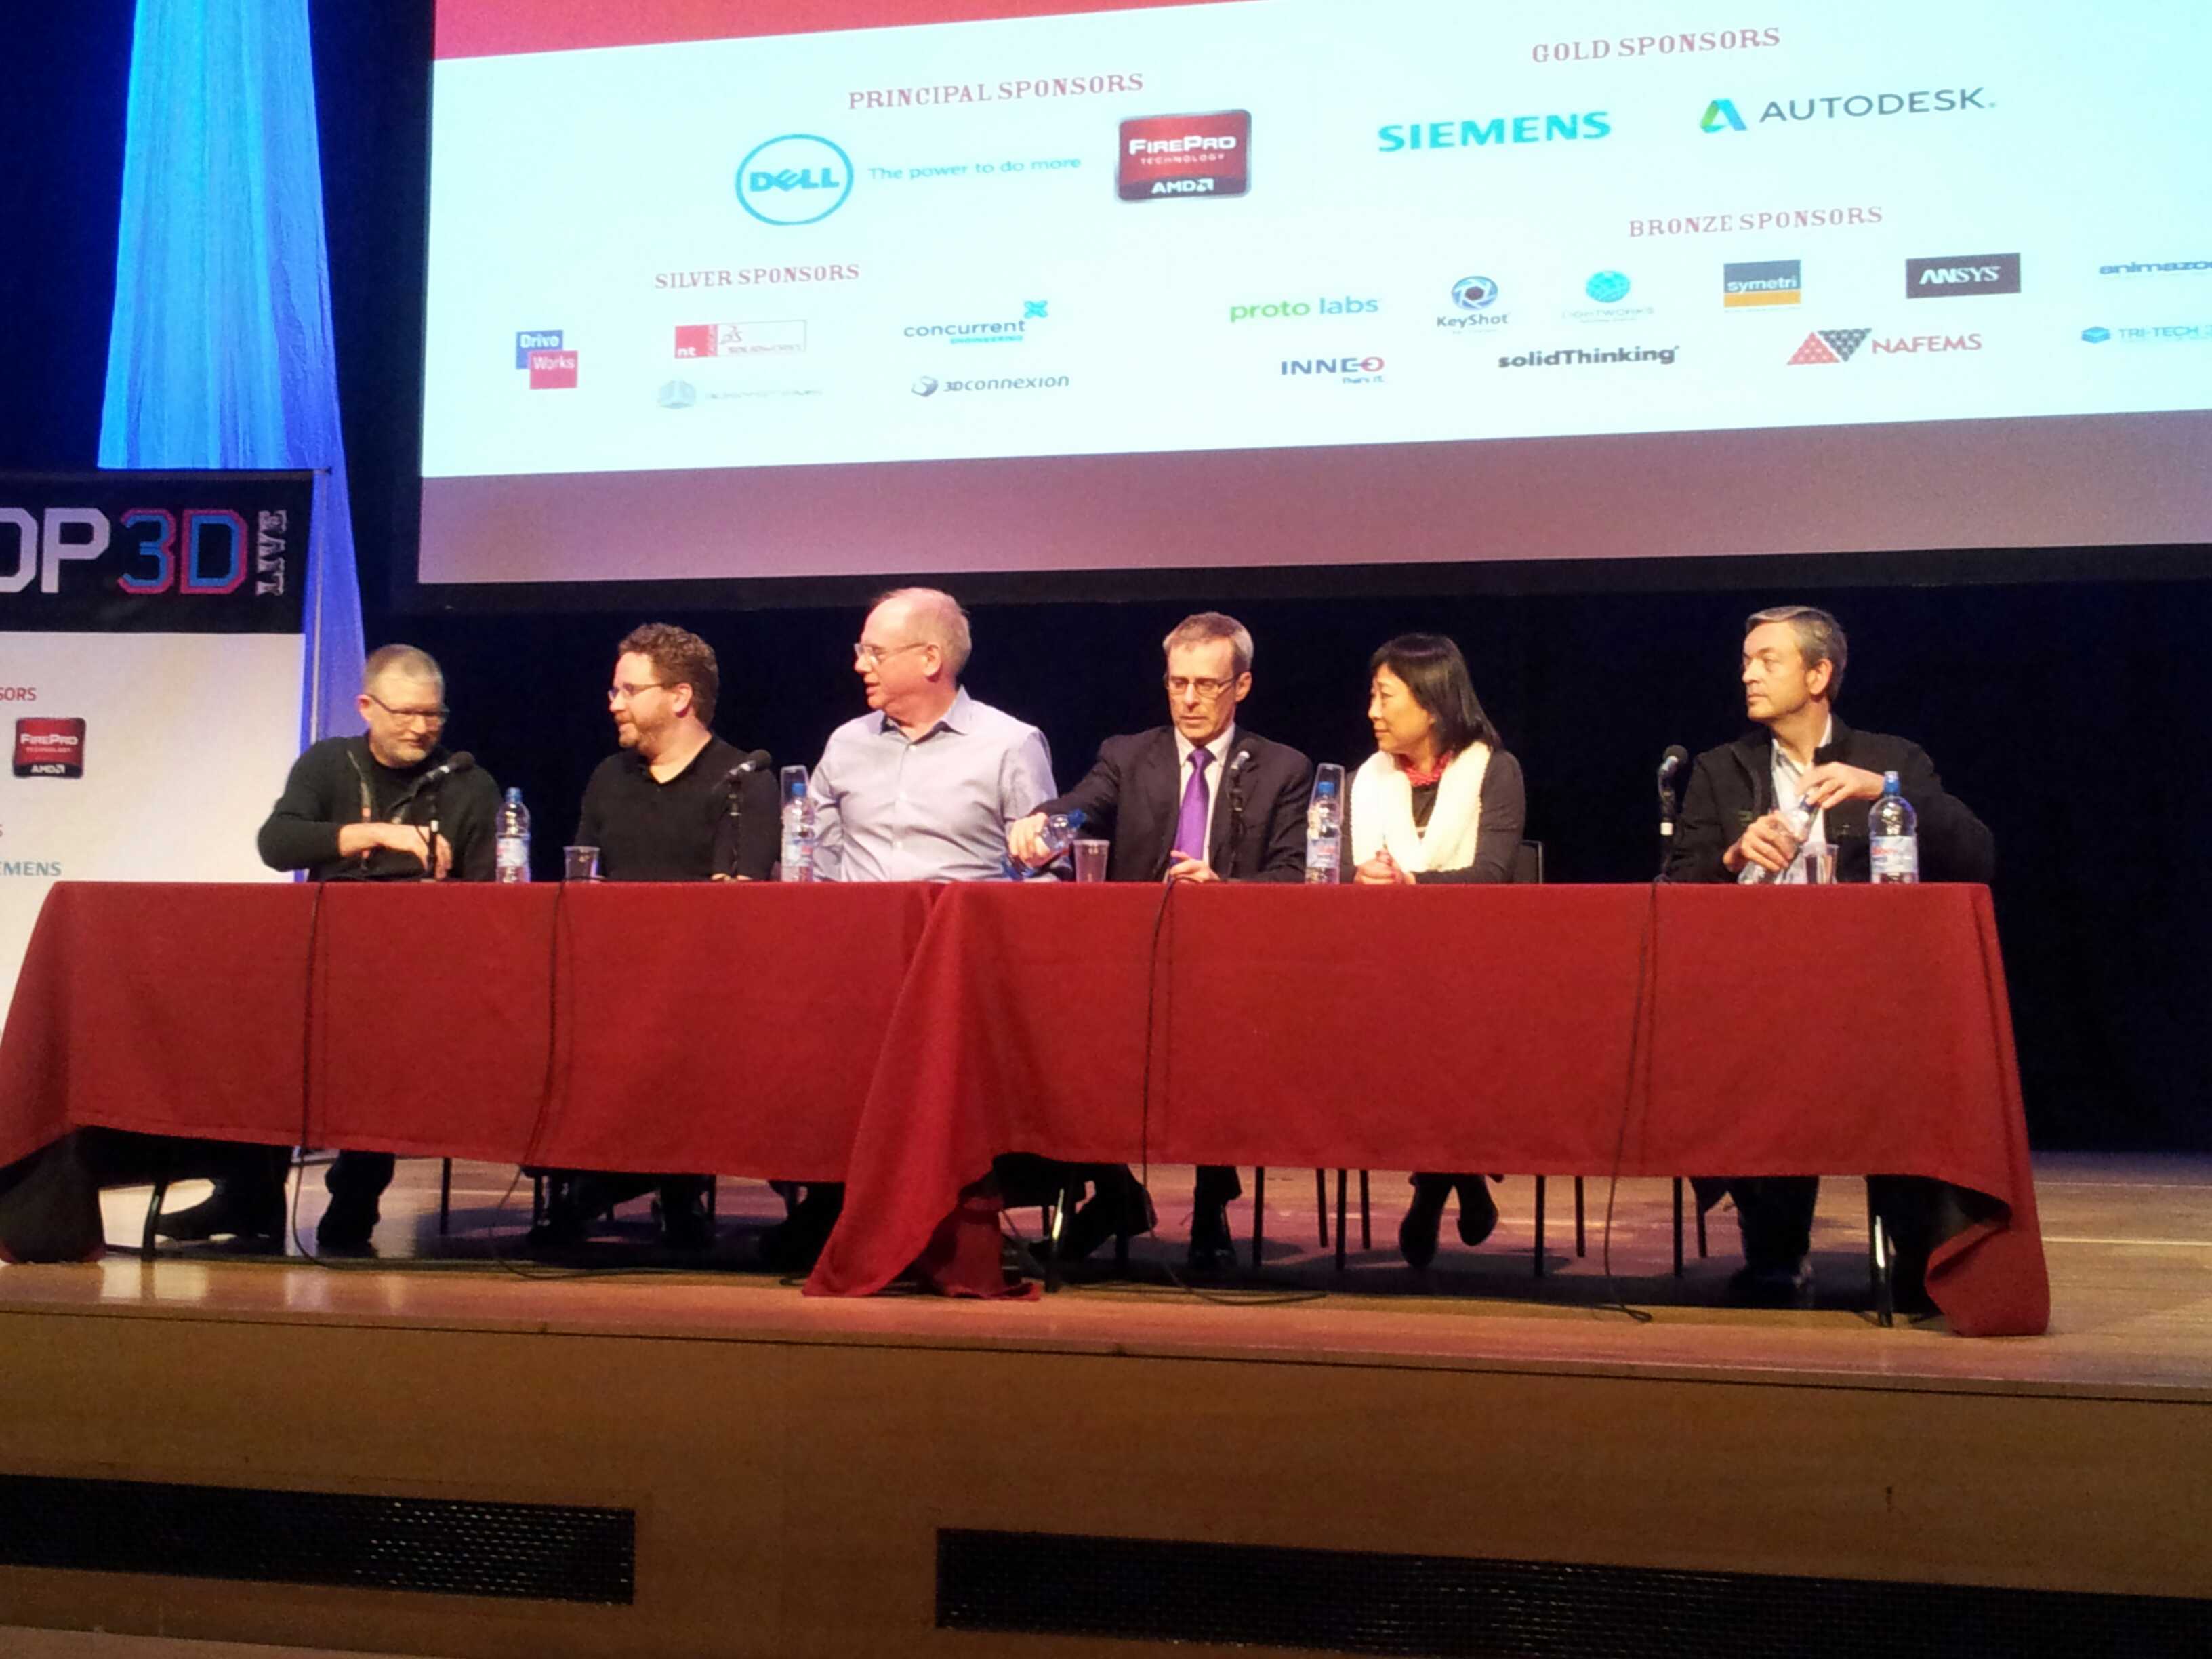 D3DLive 2013! Were you there?